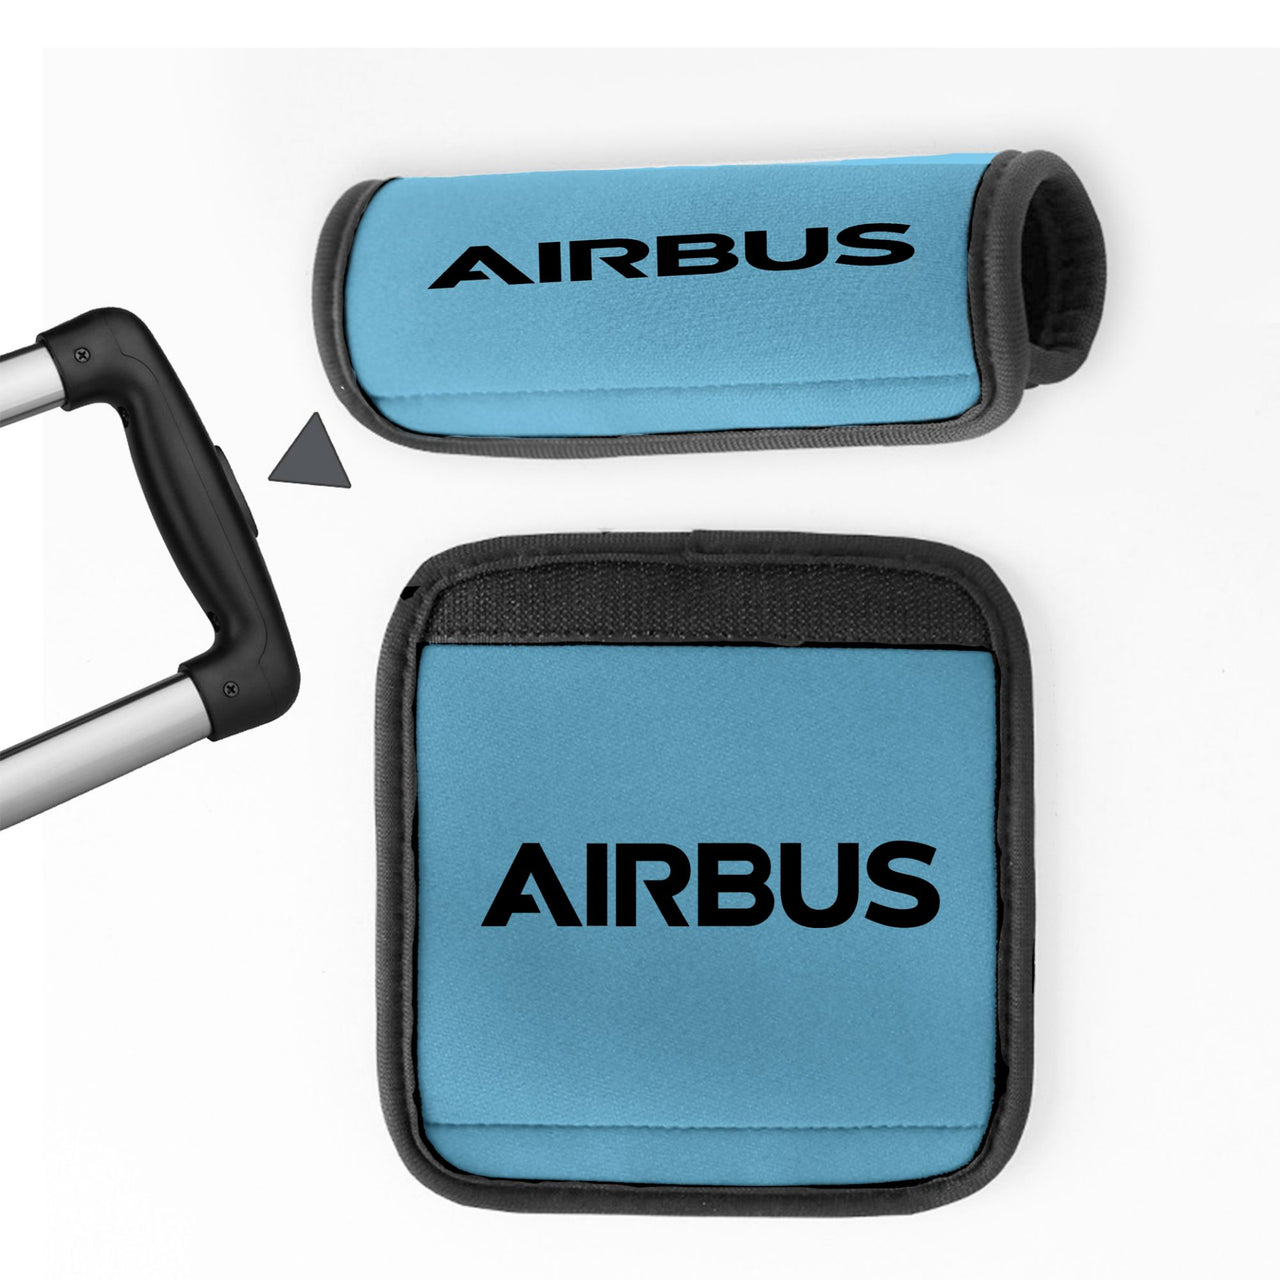 Airbus & Text Designed Neoprene Luggage Handle Covers